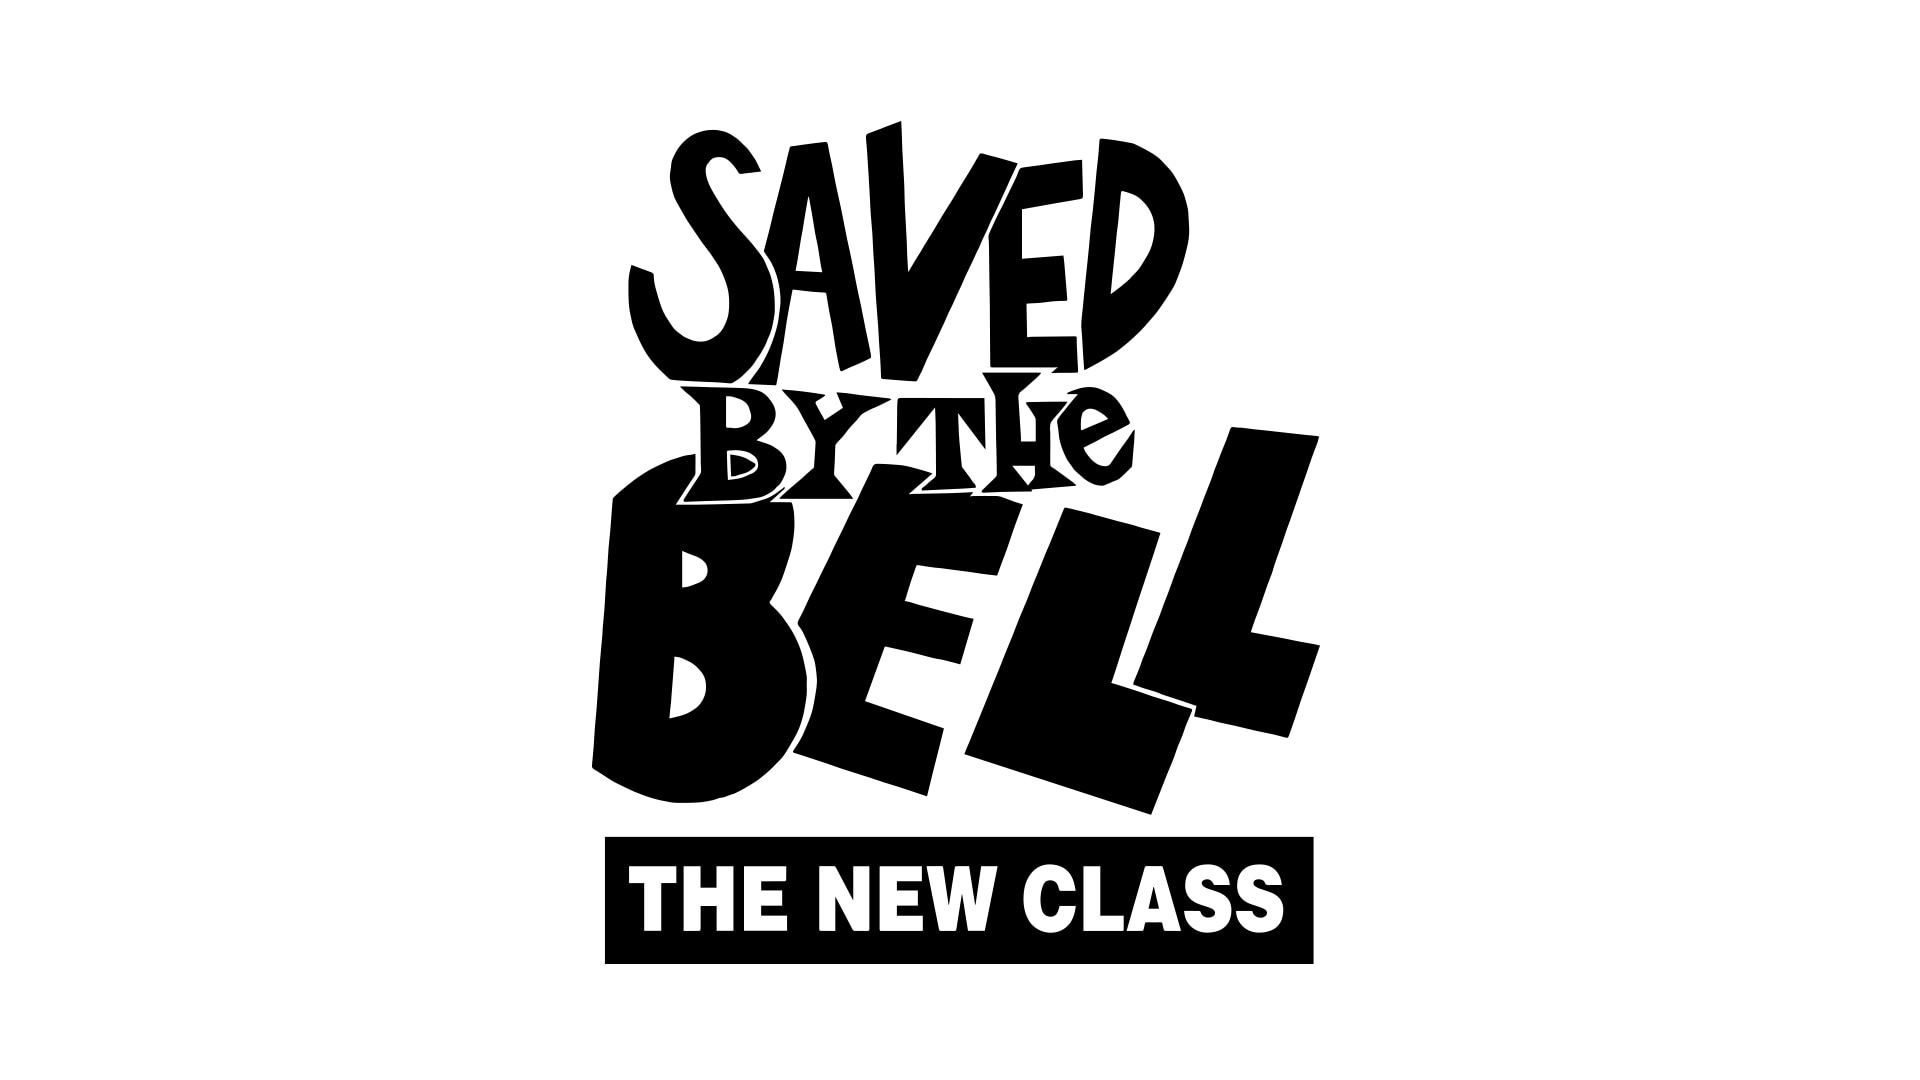 saved by the bell rachel meyers